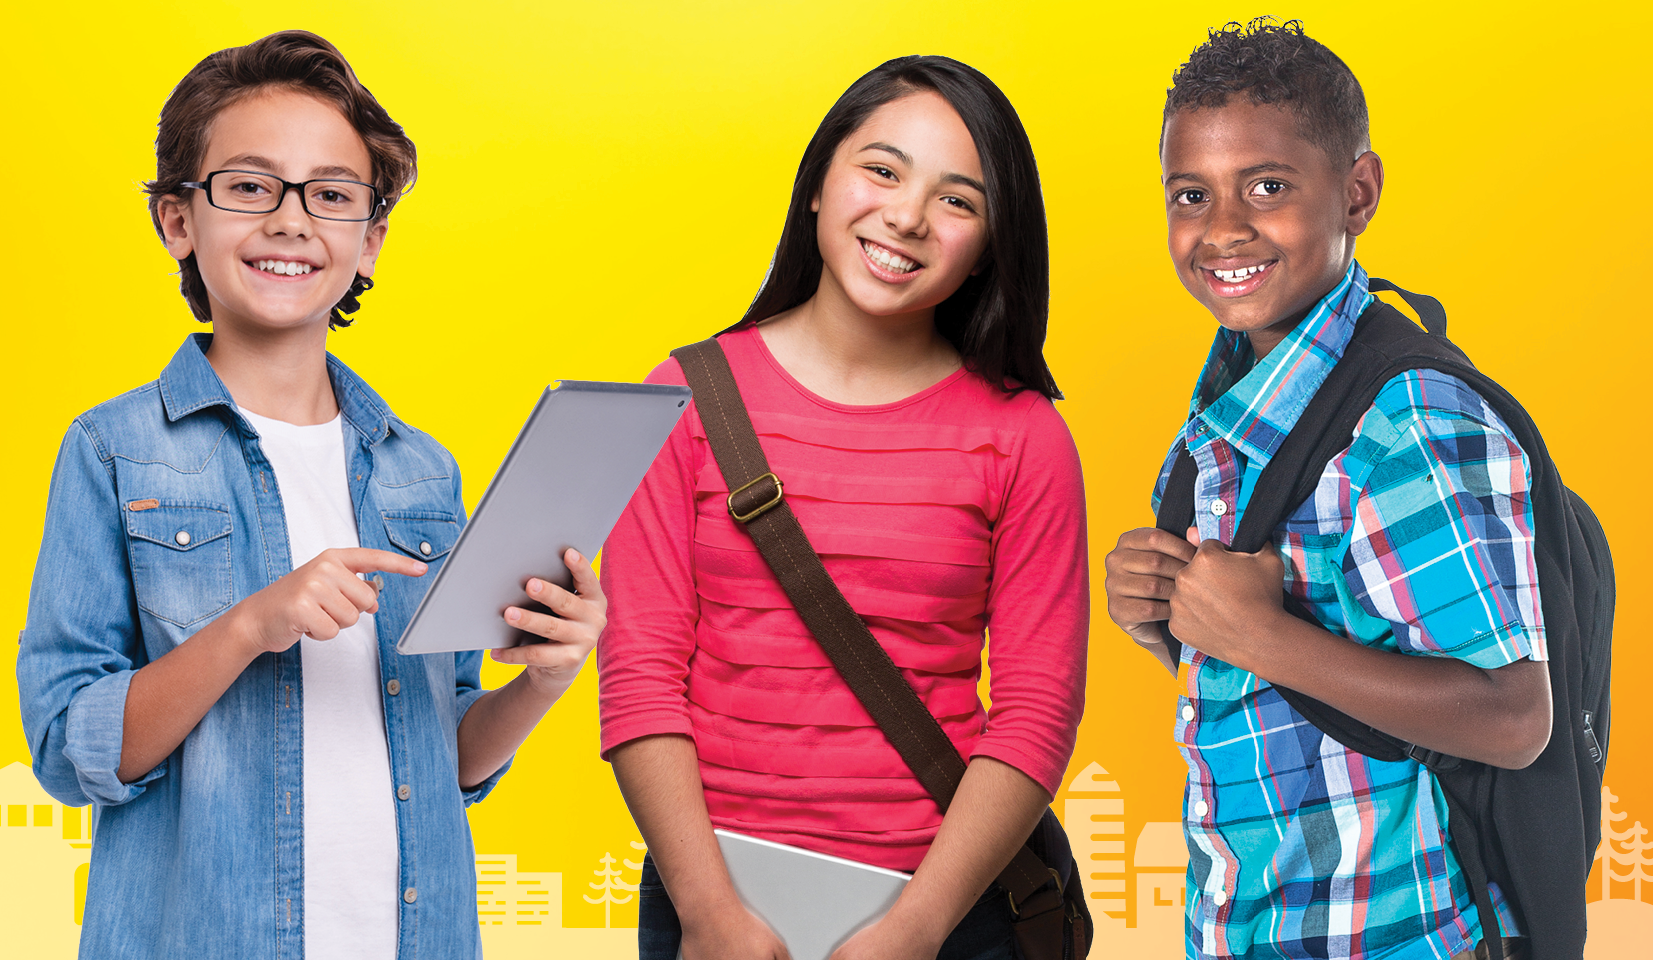 Three smiling students with backpacks and tablets stand in front of a bright yellow backround. 